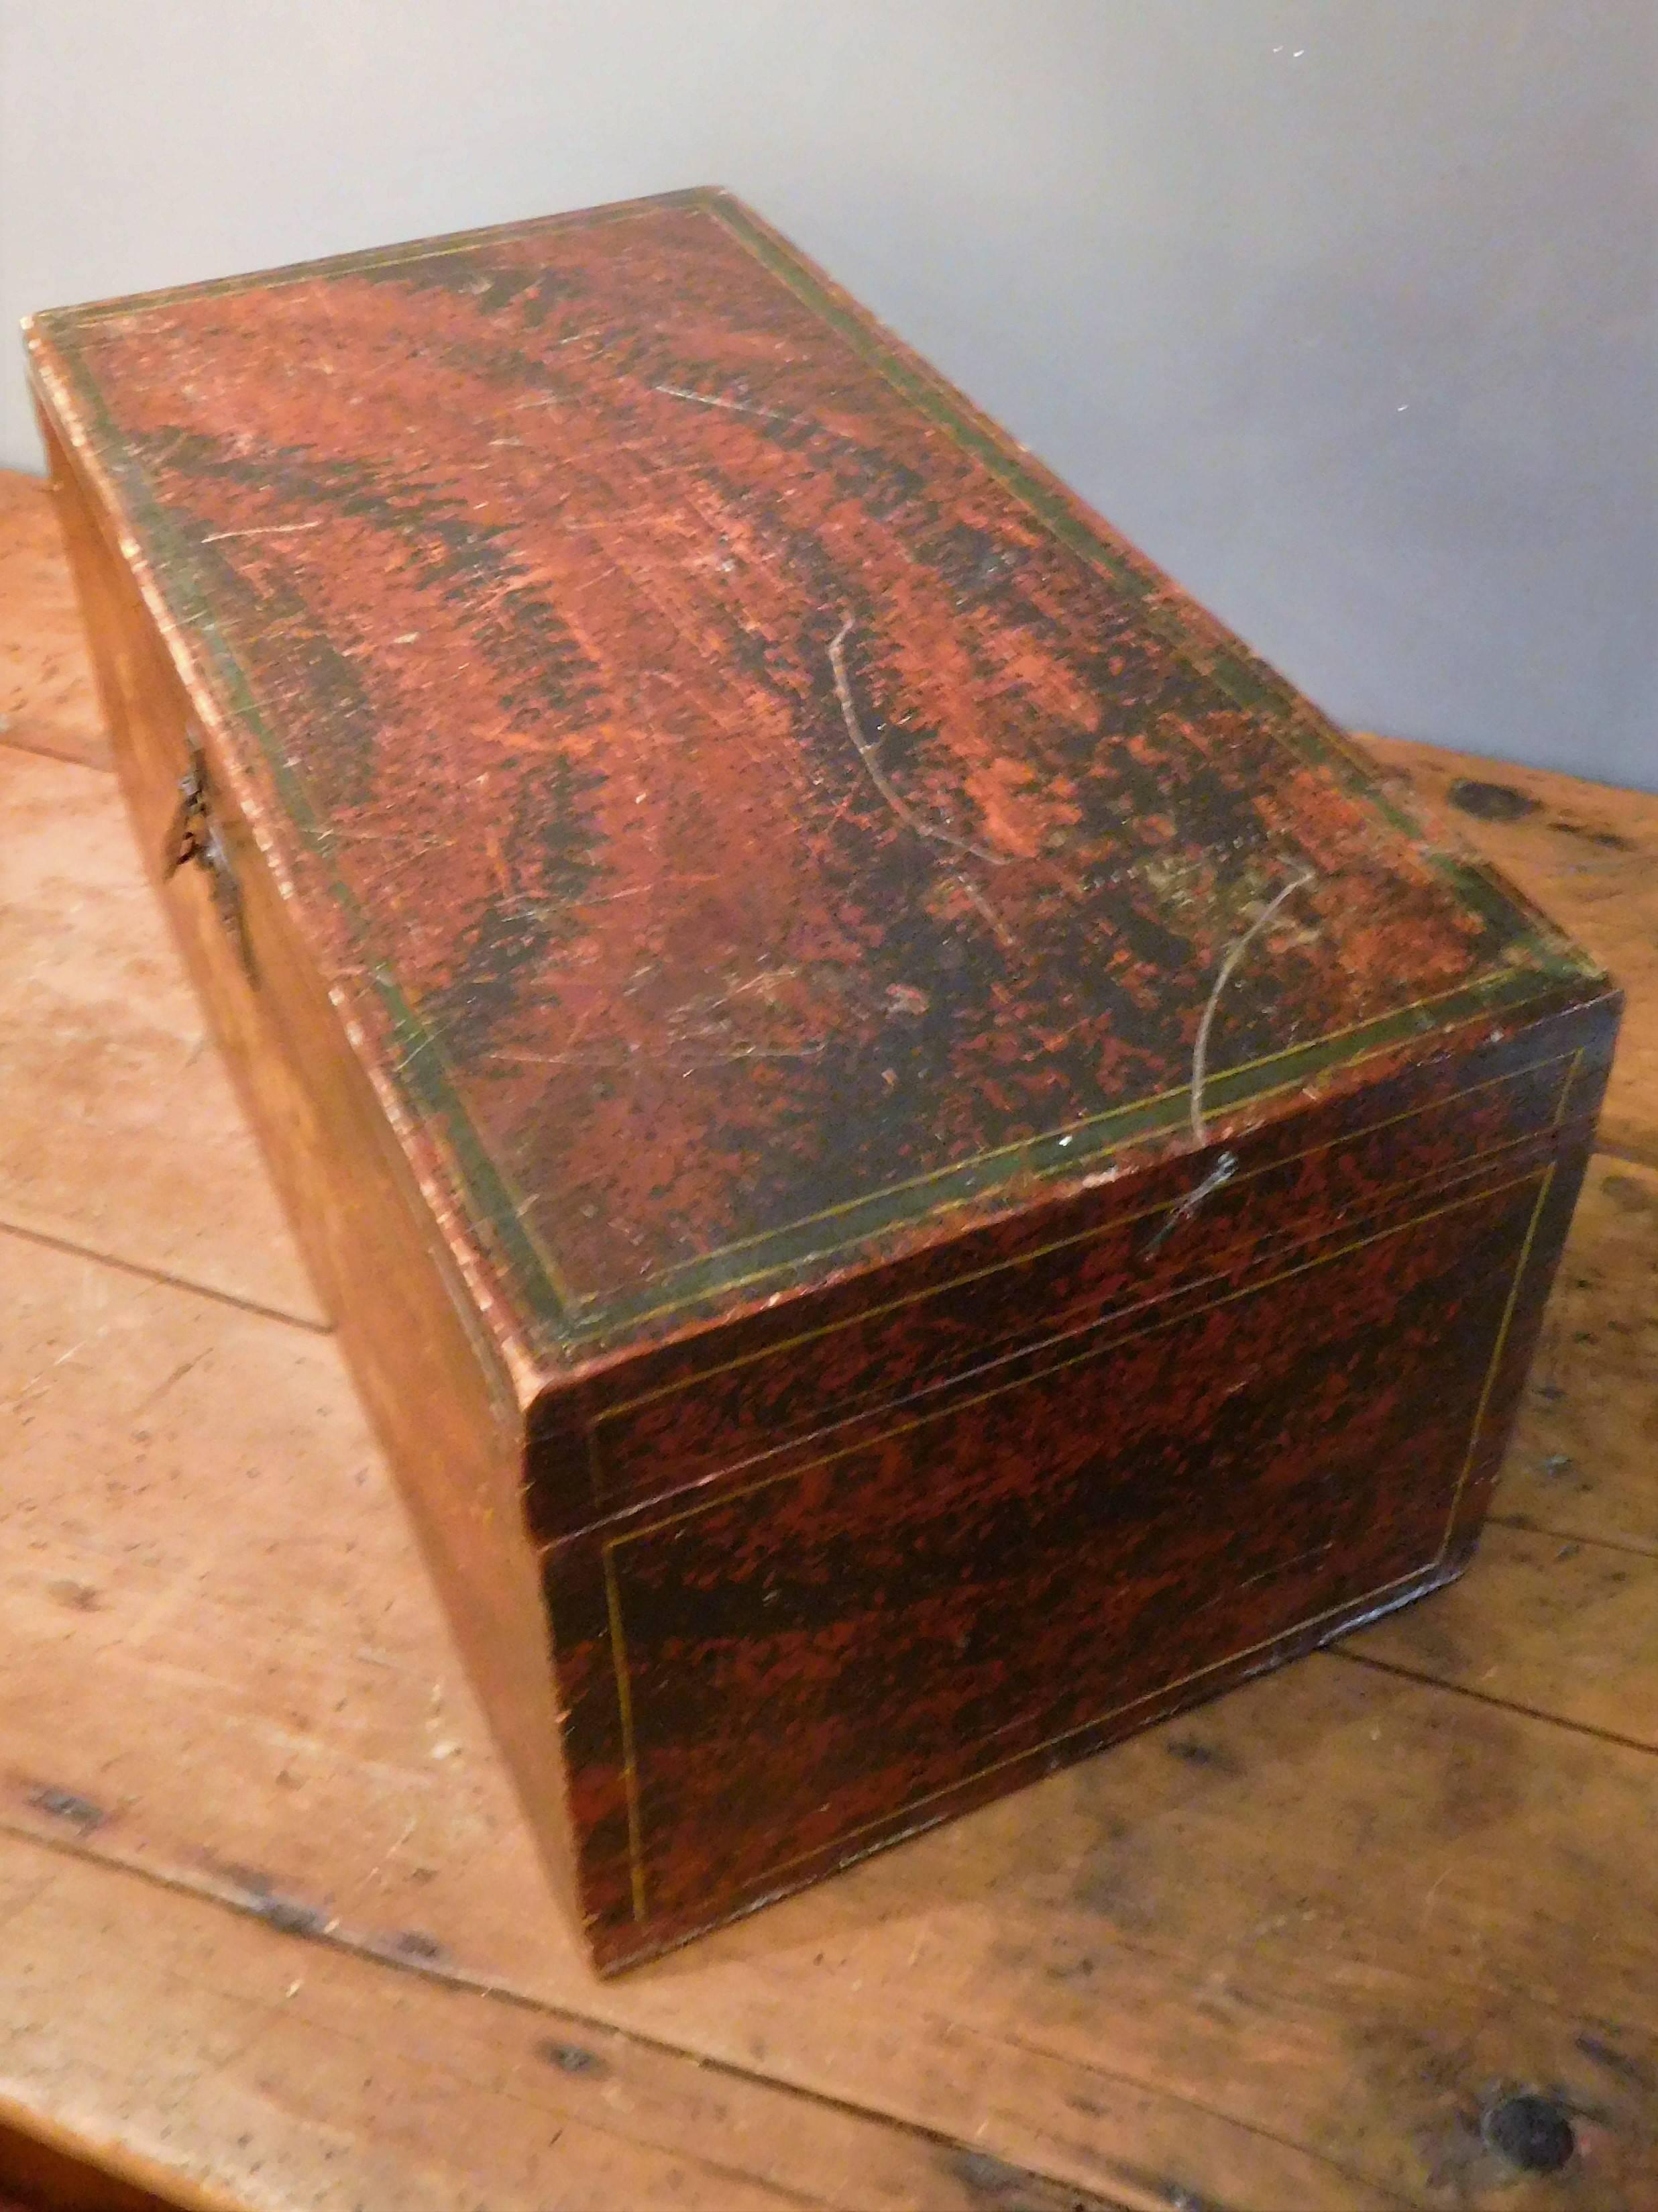 Decorated Storage or Document Box, New England Folk Art, Mid-19th Century For Sale 1